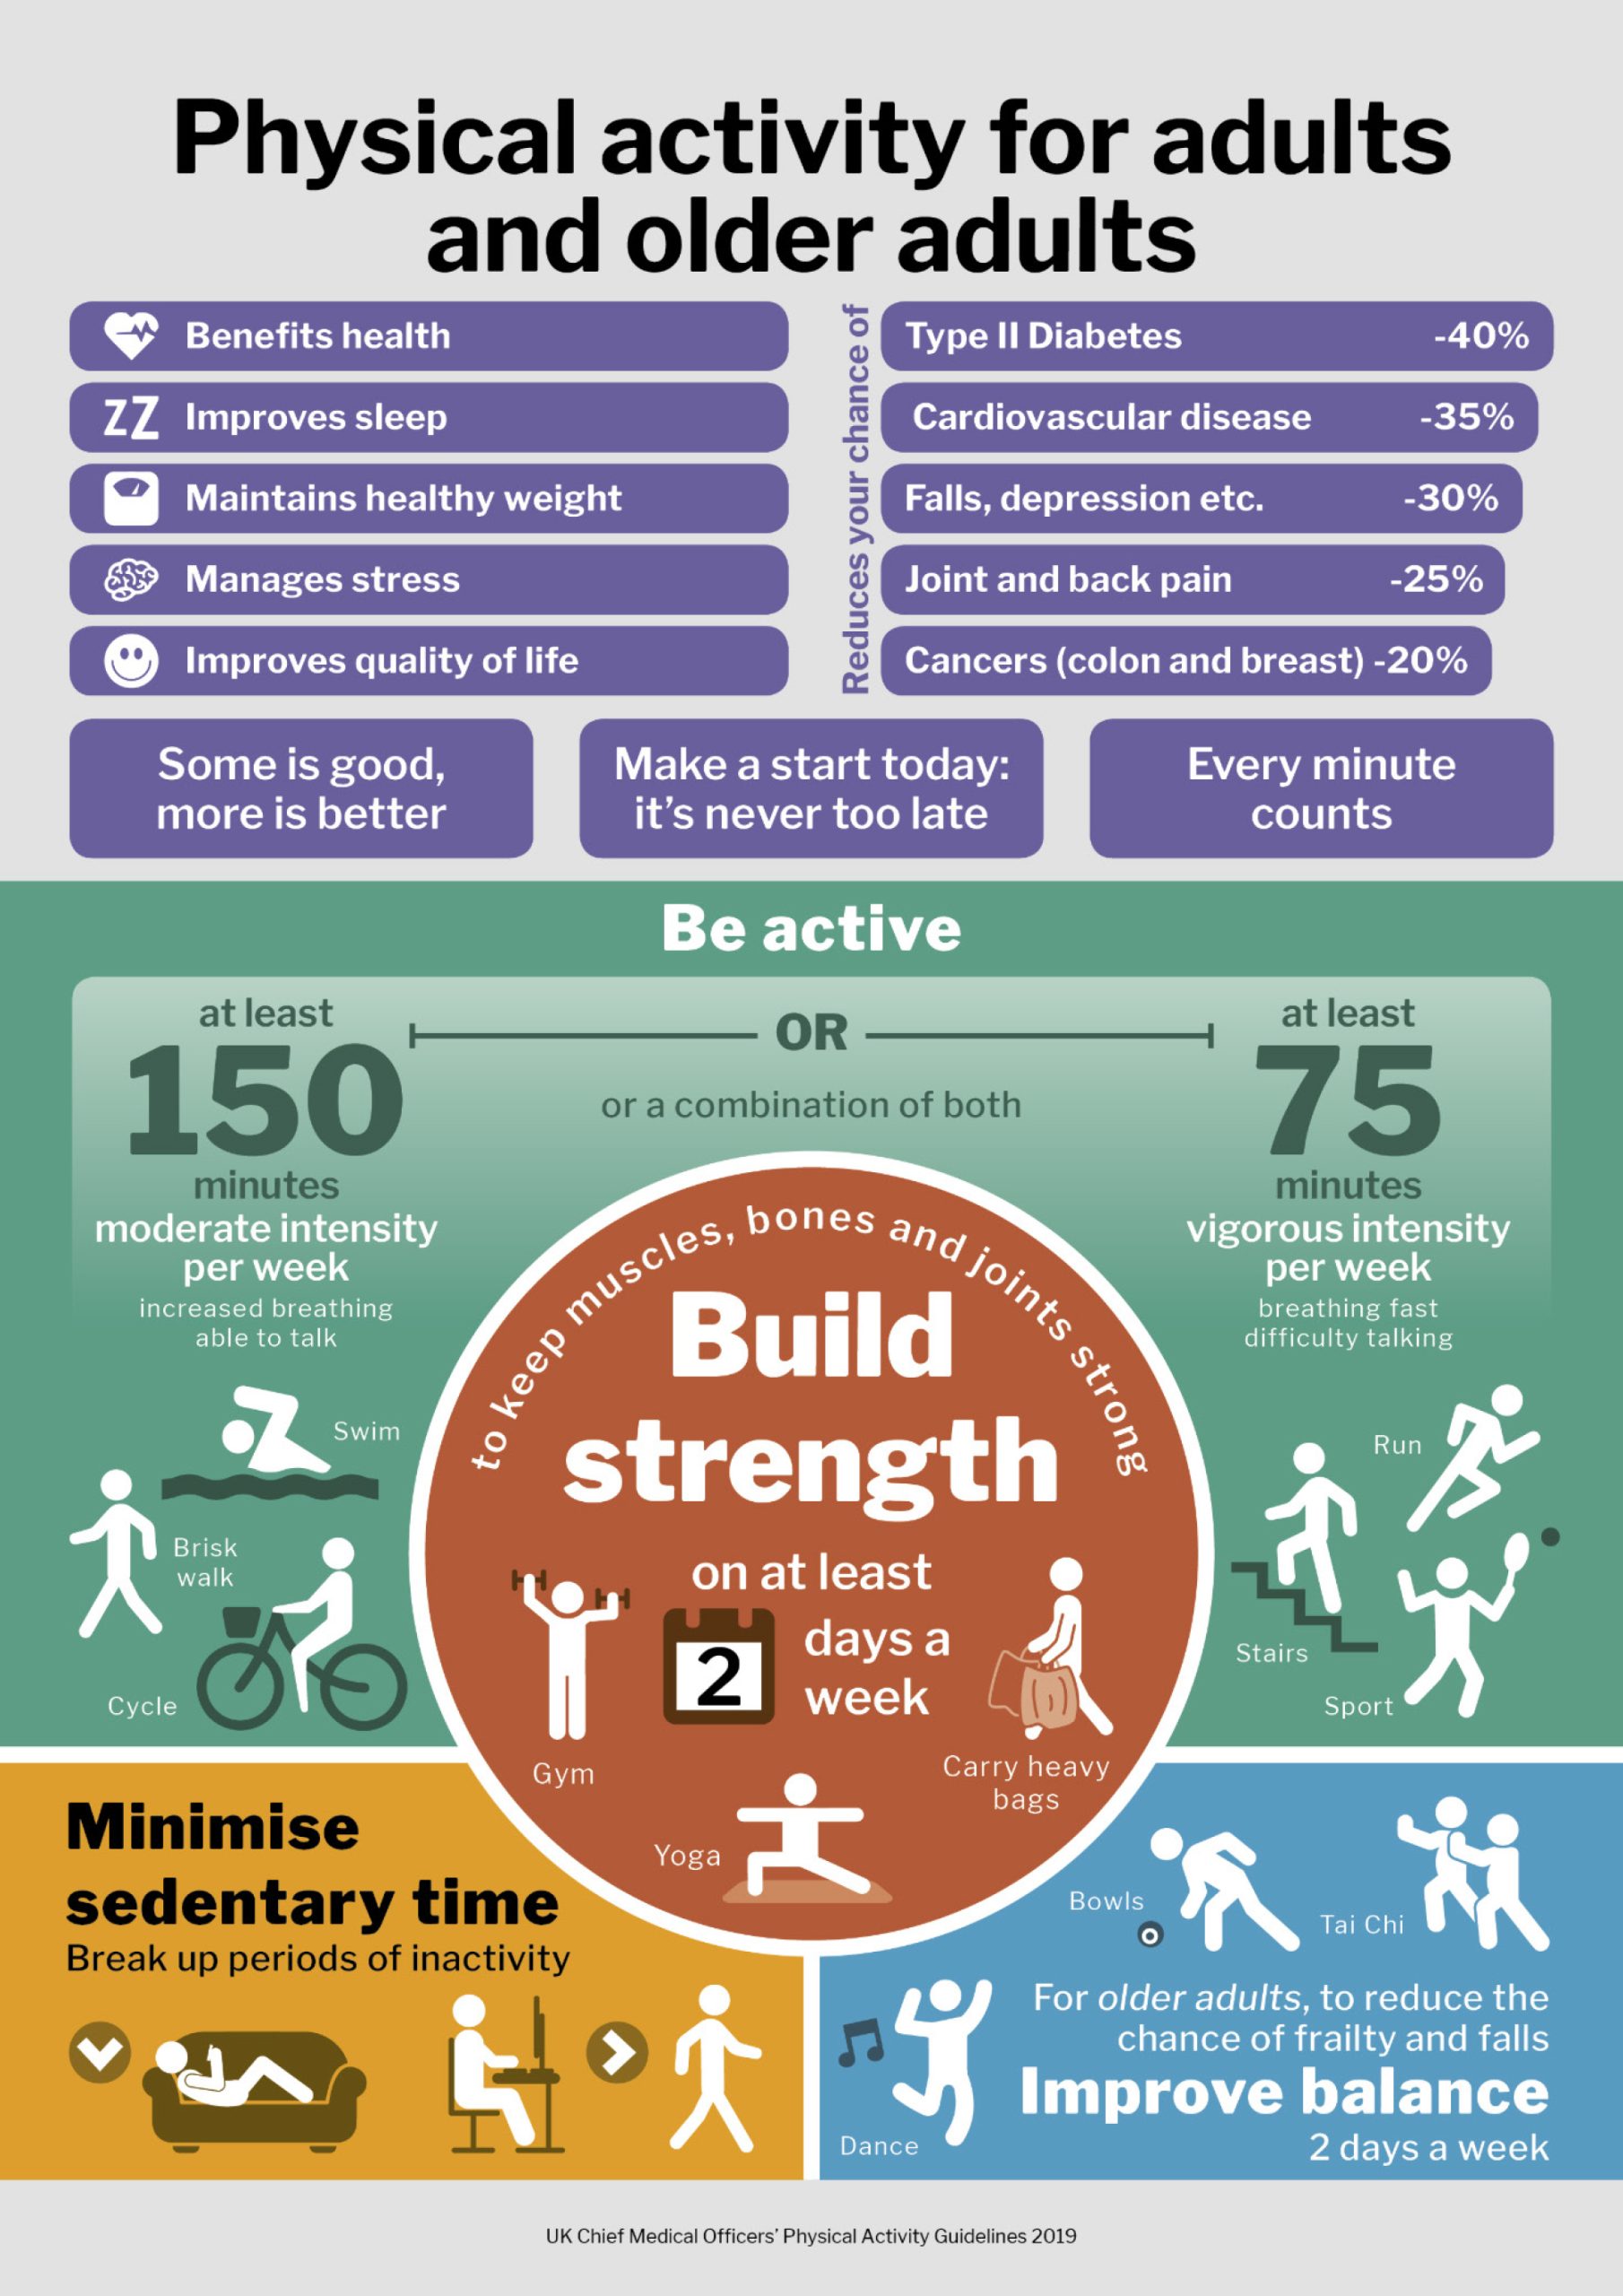 Physical activity for adults and older adults